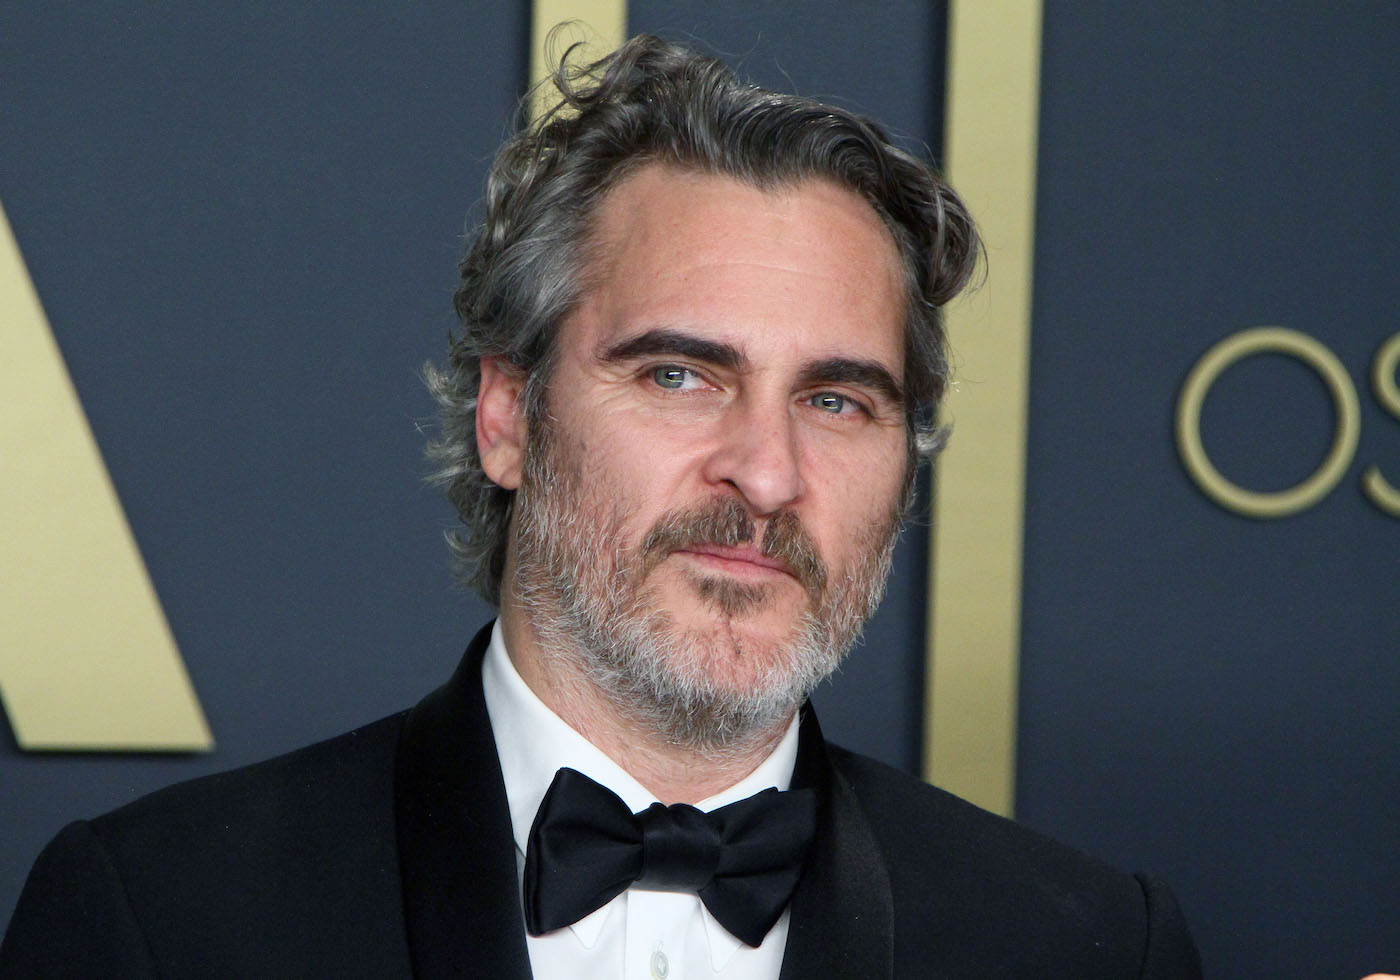 joaquin phoenix's family history related to cults